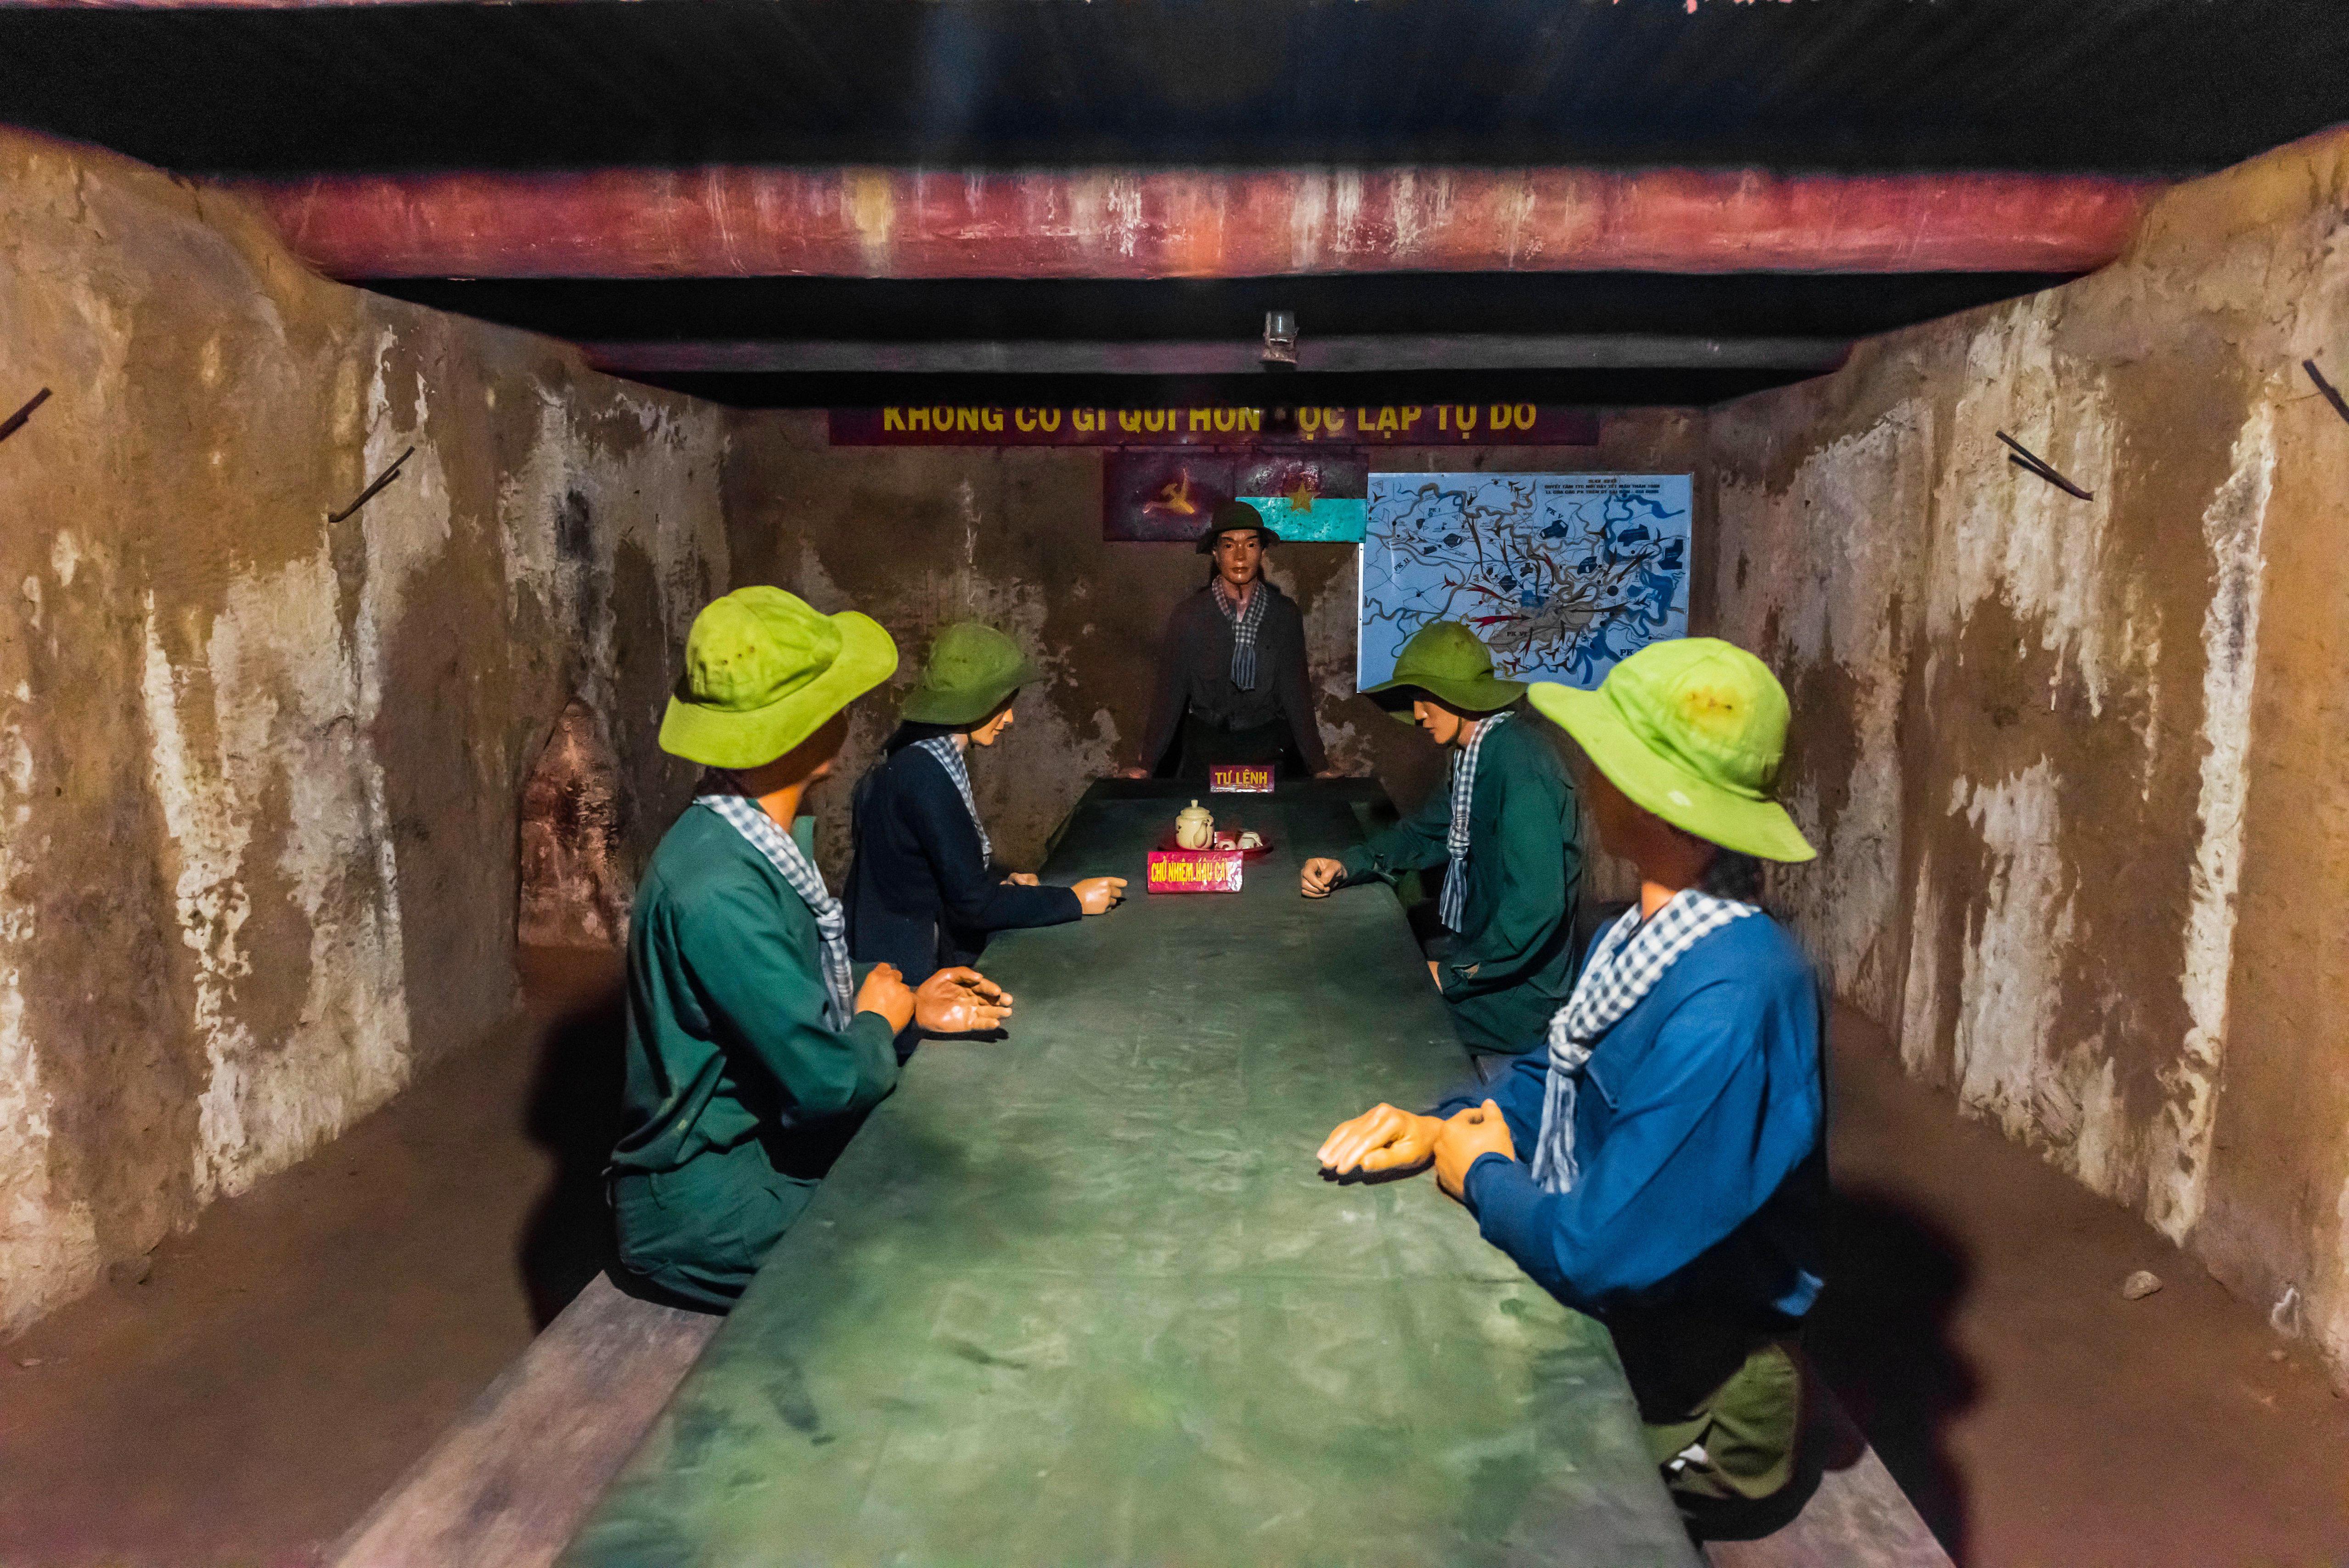 A meeting room in the Cu Chi tunnels (Alamy)